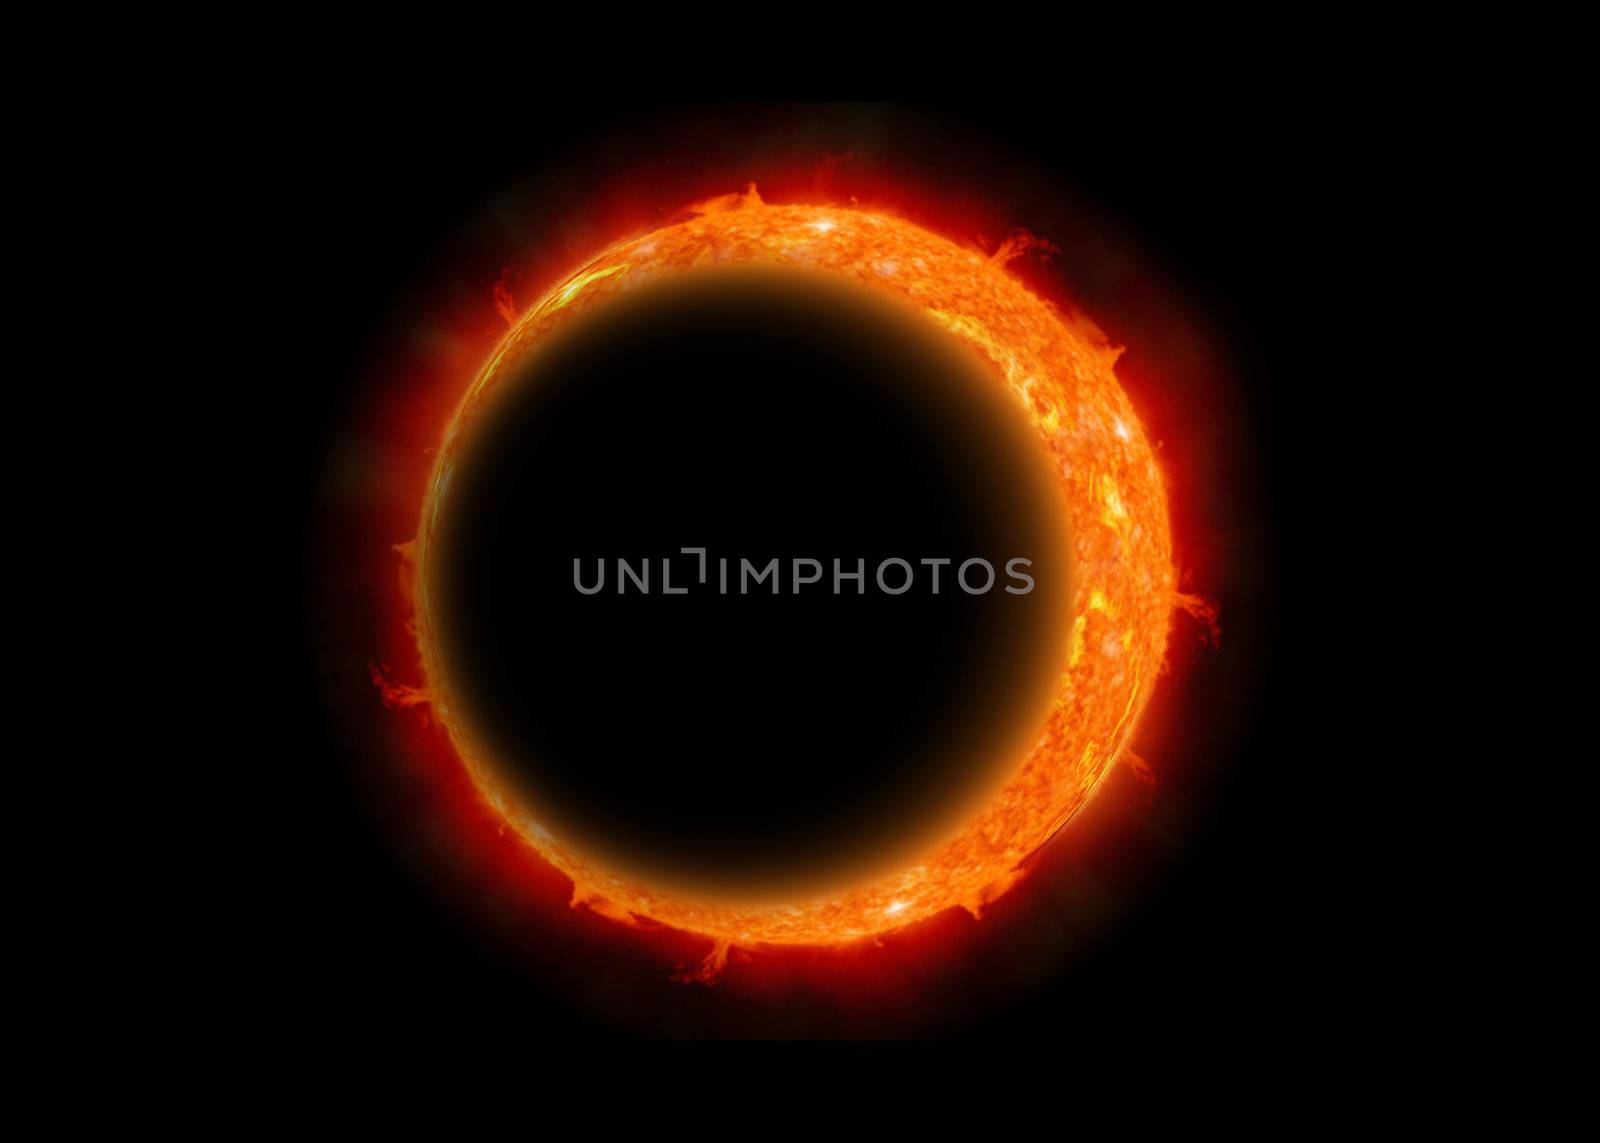 The eclipse of the moon, Abstract scientific background - full eclipse, black hole.